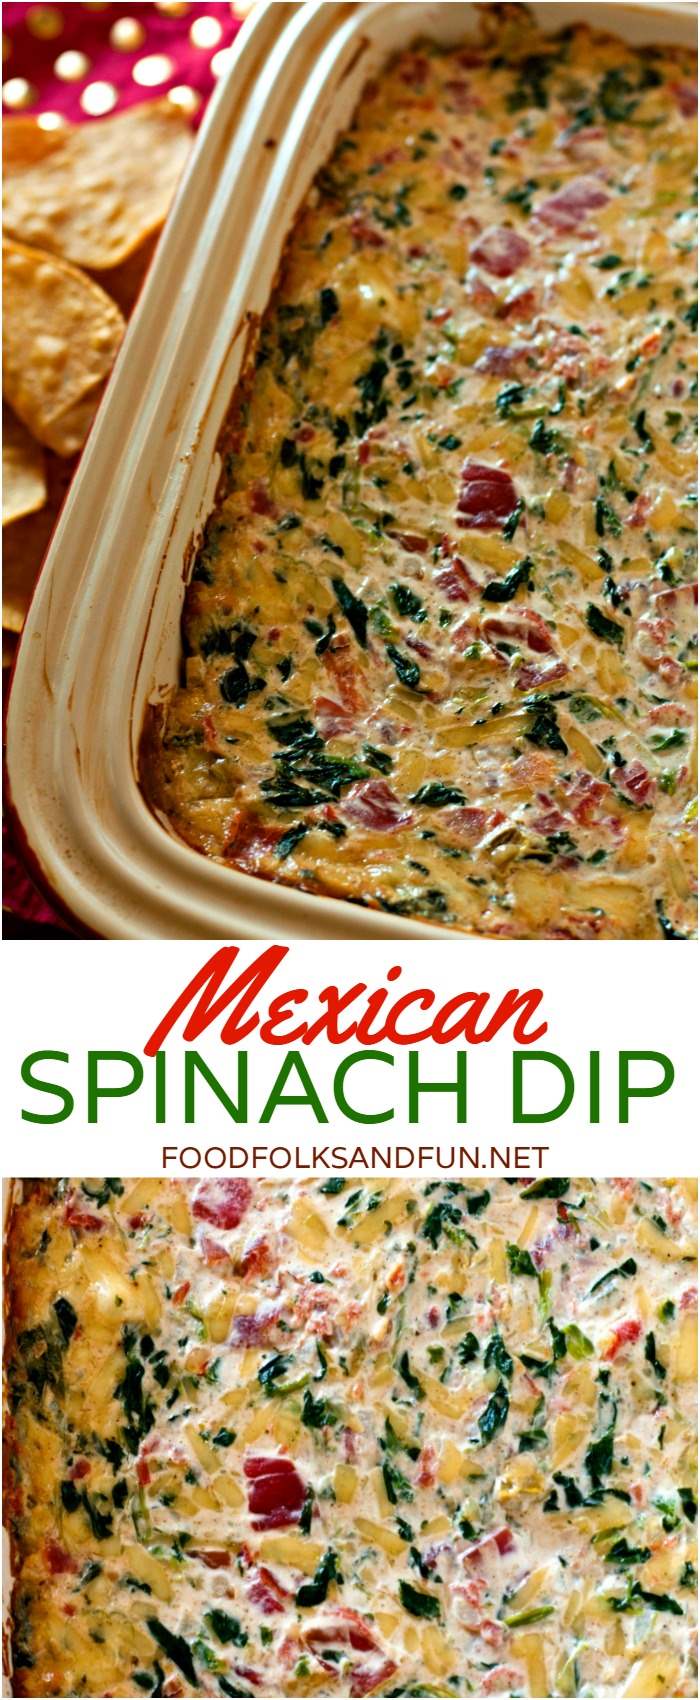 If you love spinach dip and Mexican food then you'll LOVE my Mexican Spinach Dip! It's a tasty Super Bowl recipe!